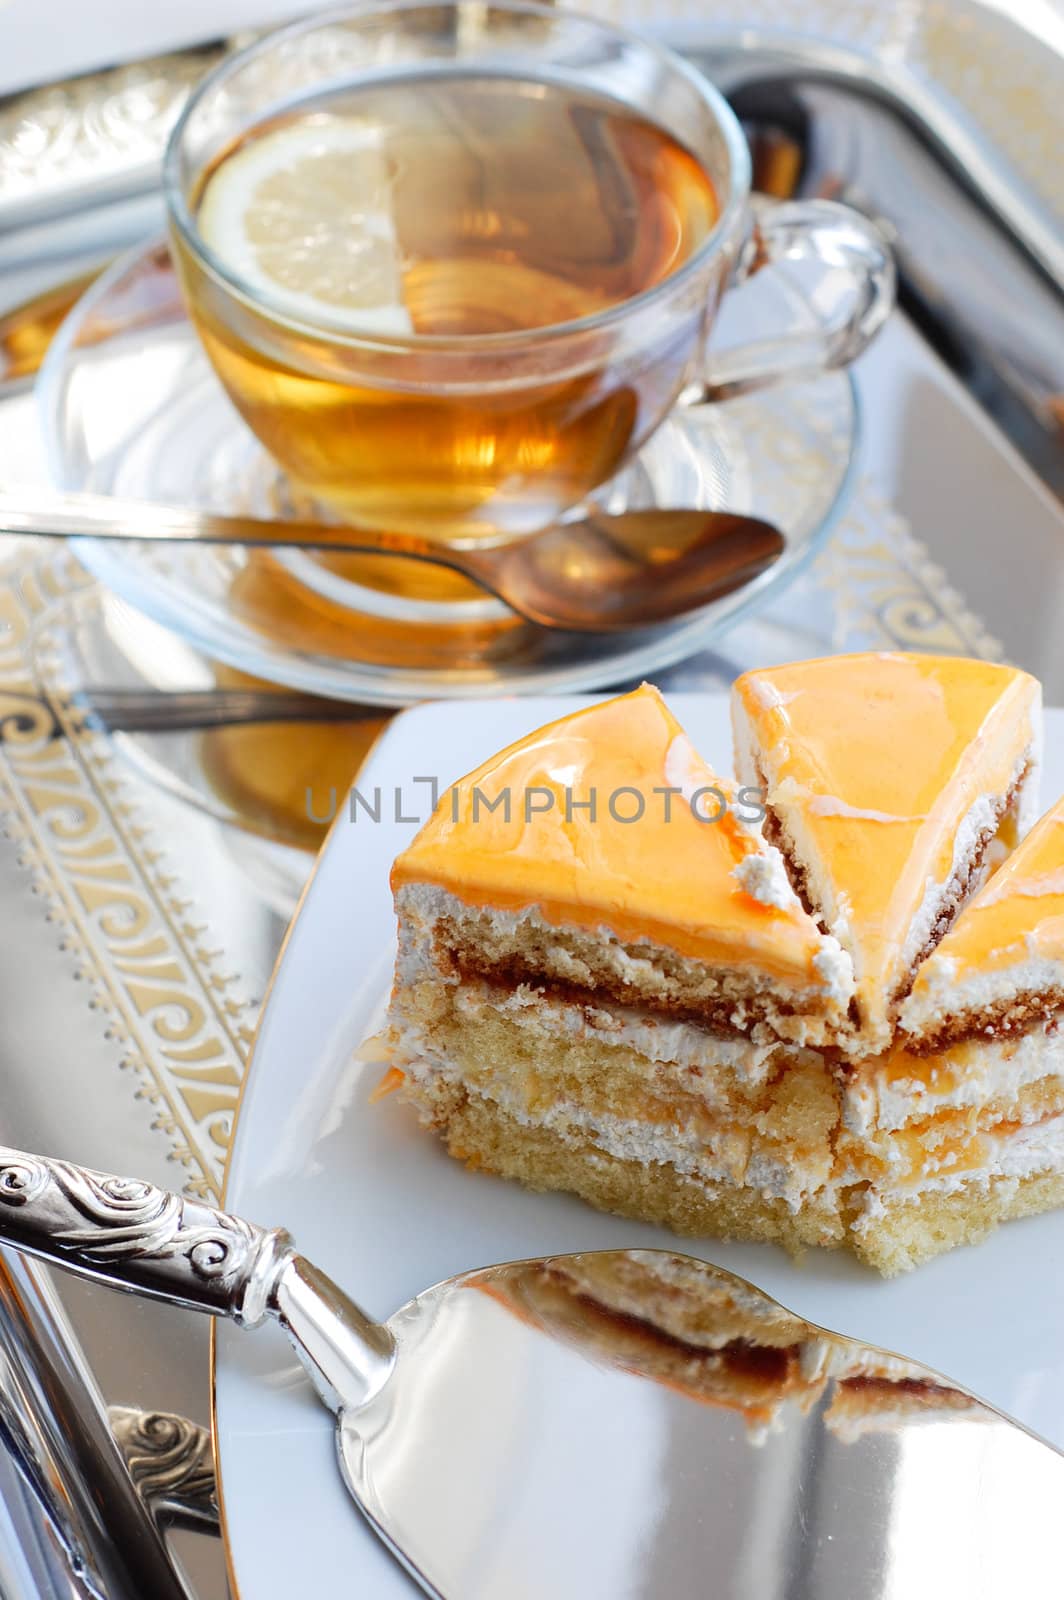 Piece of cake with apricot and tea on tray